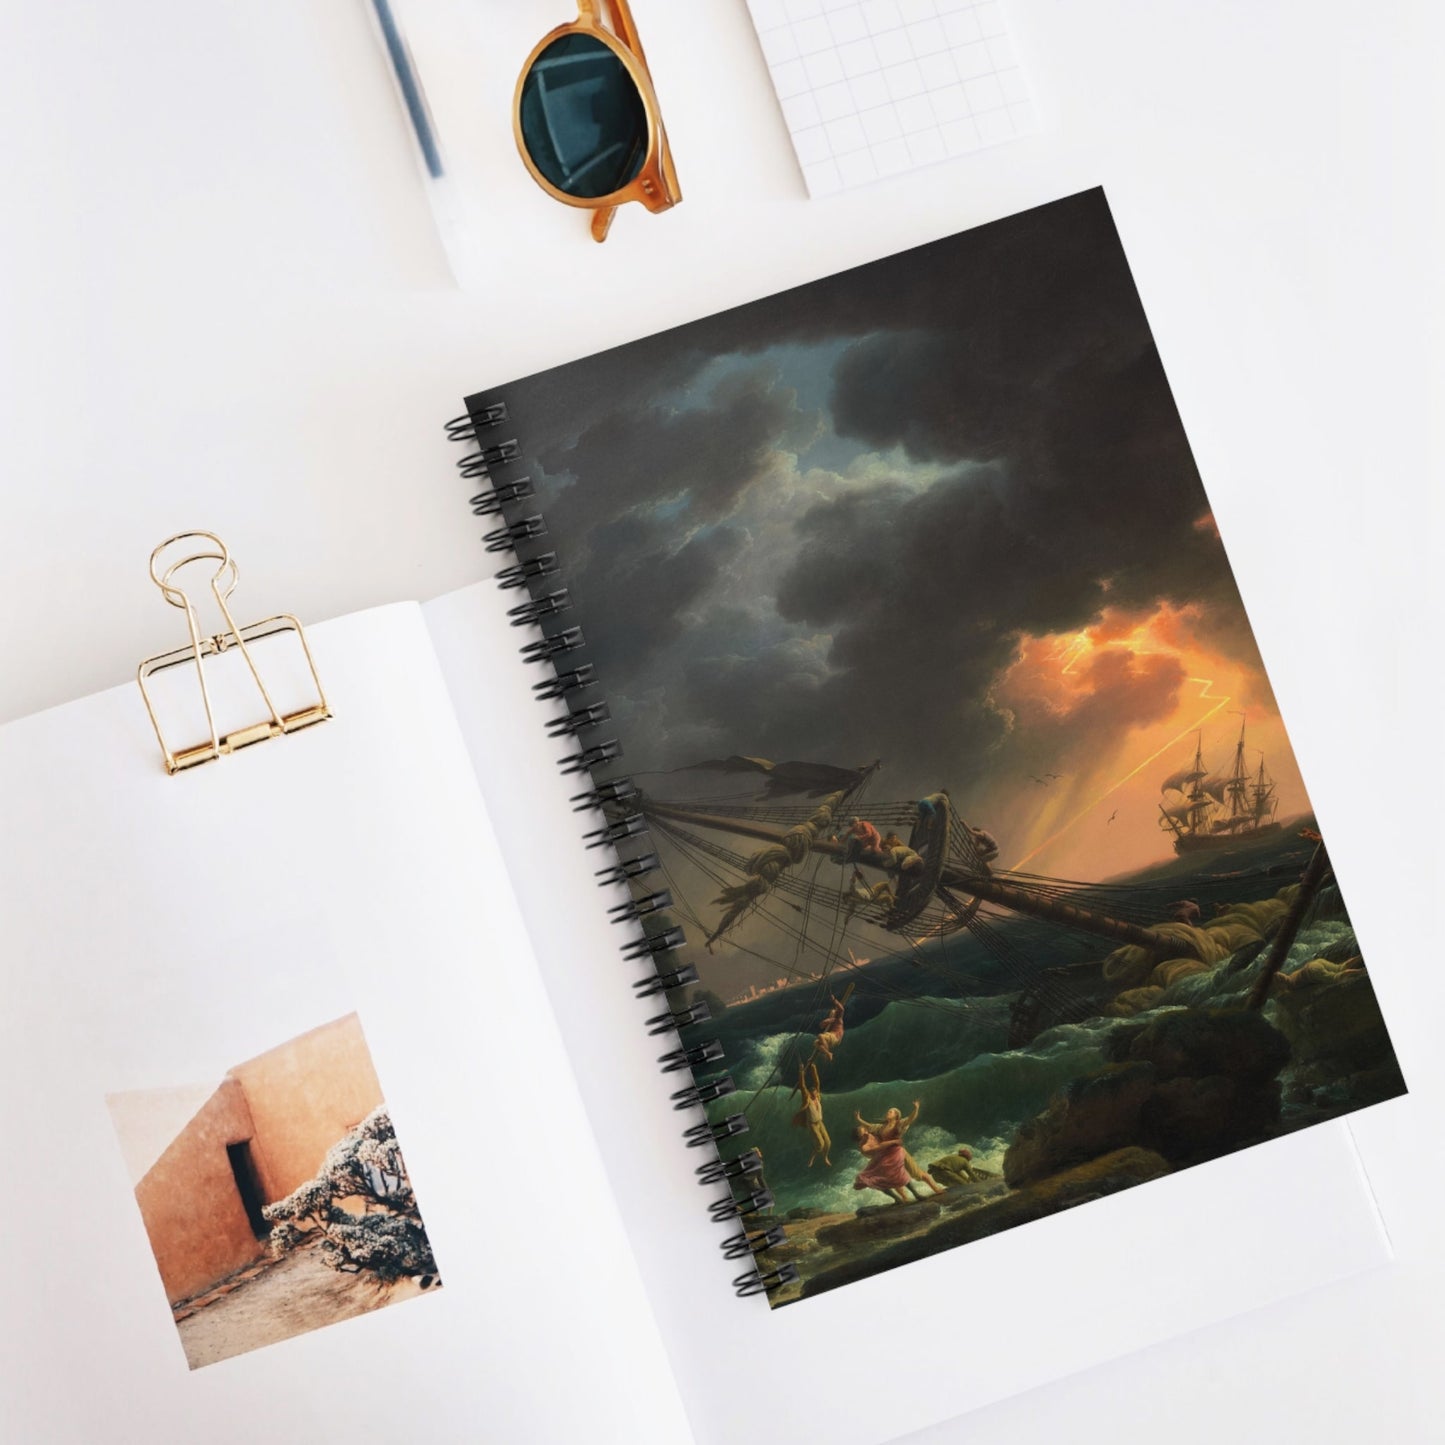 Antique Sea Painting Spiral Notebook Displayed on Desk